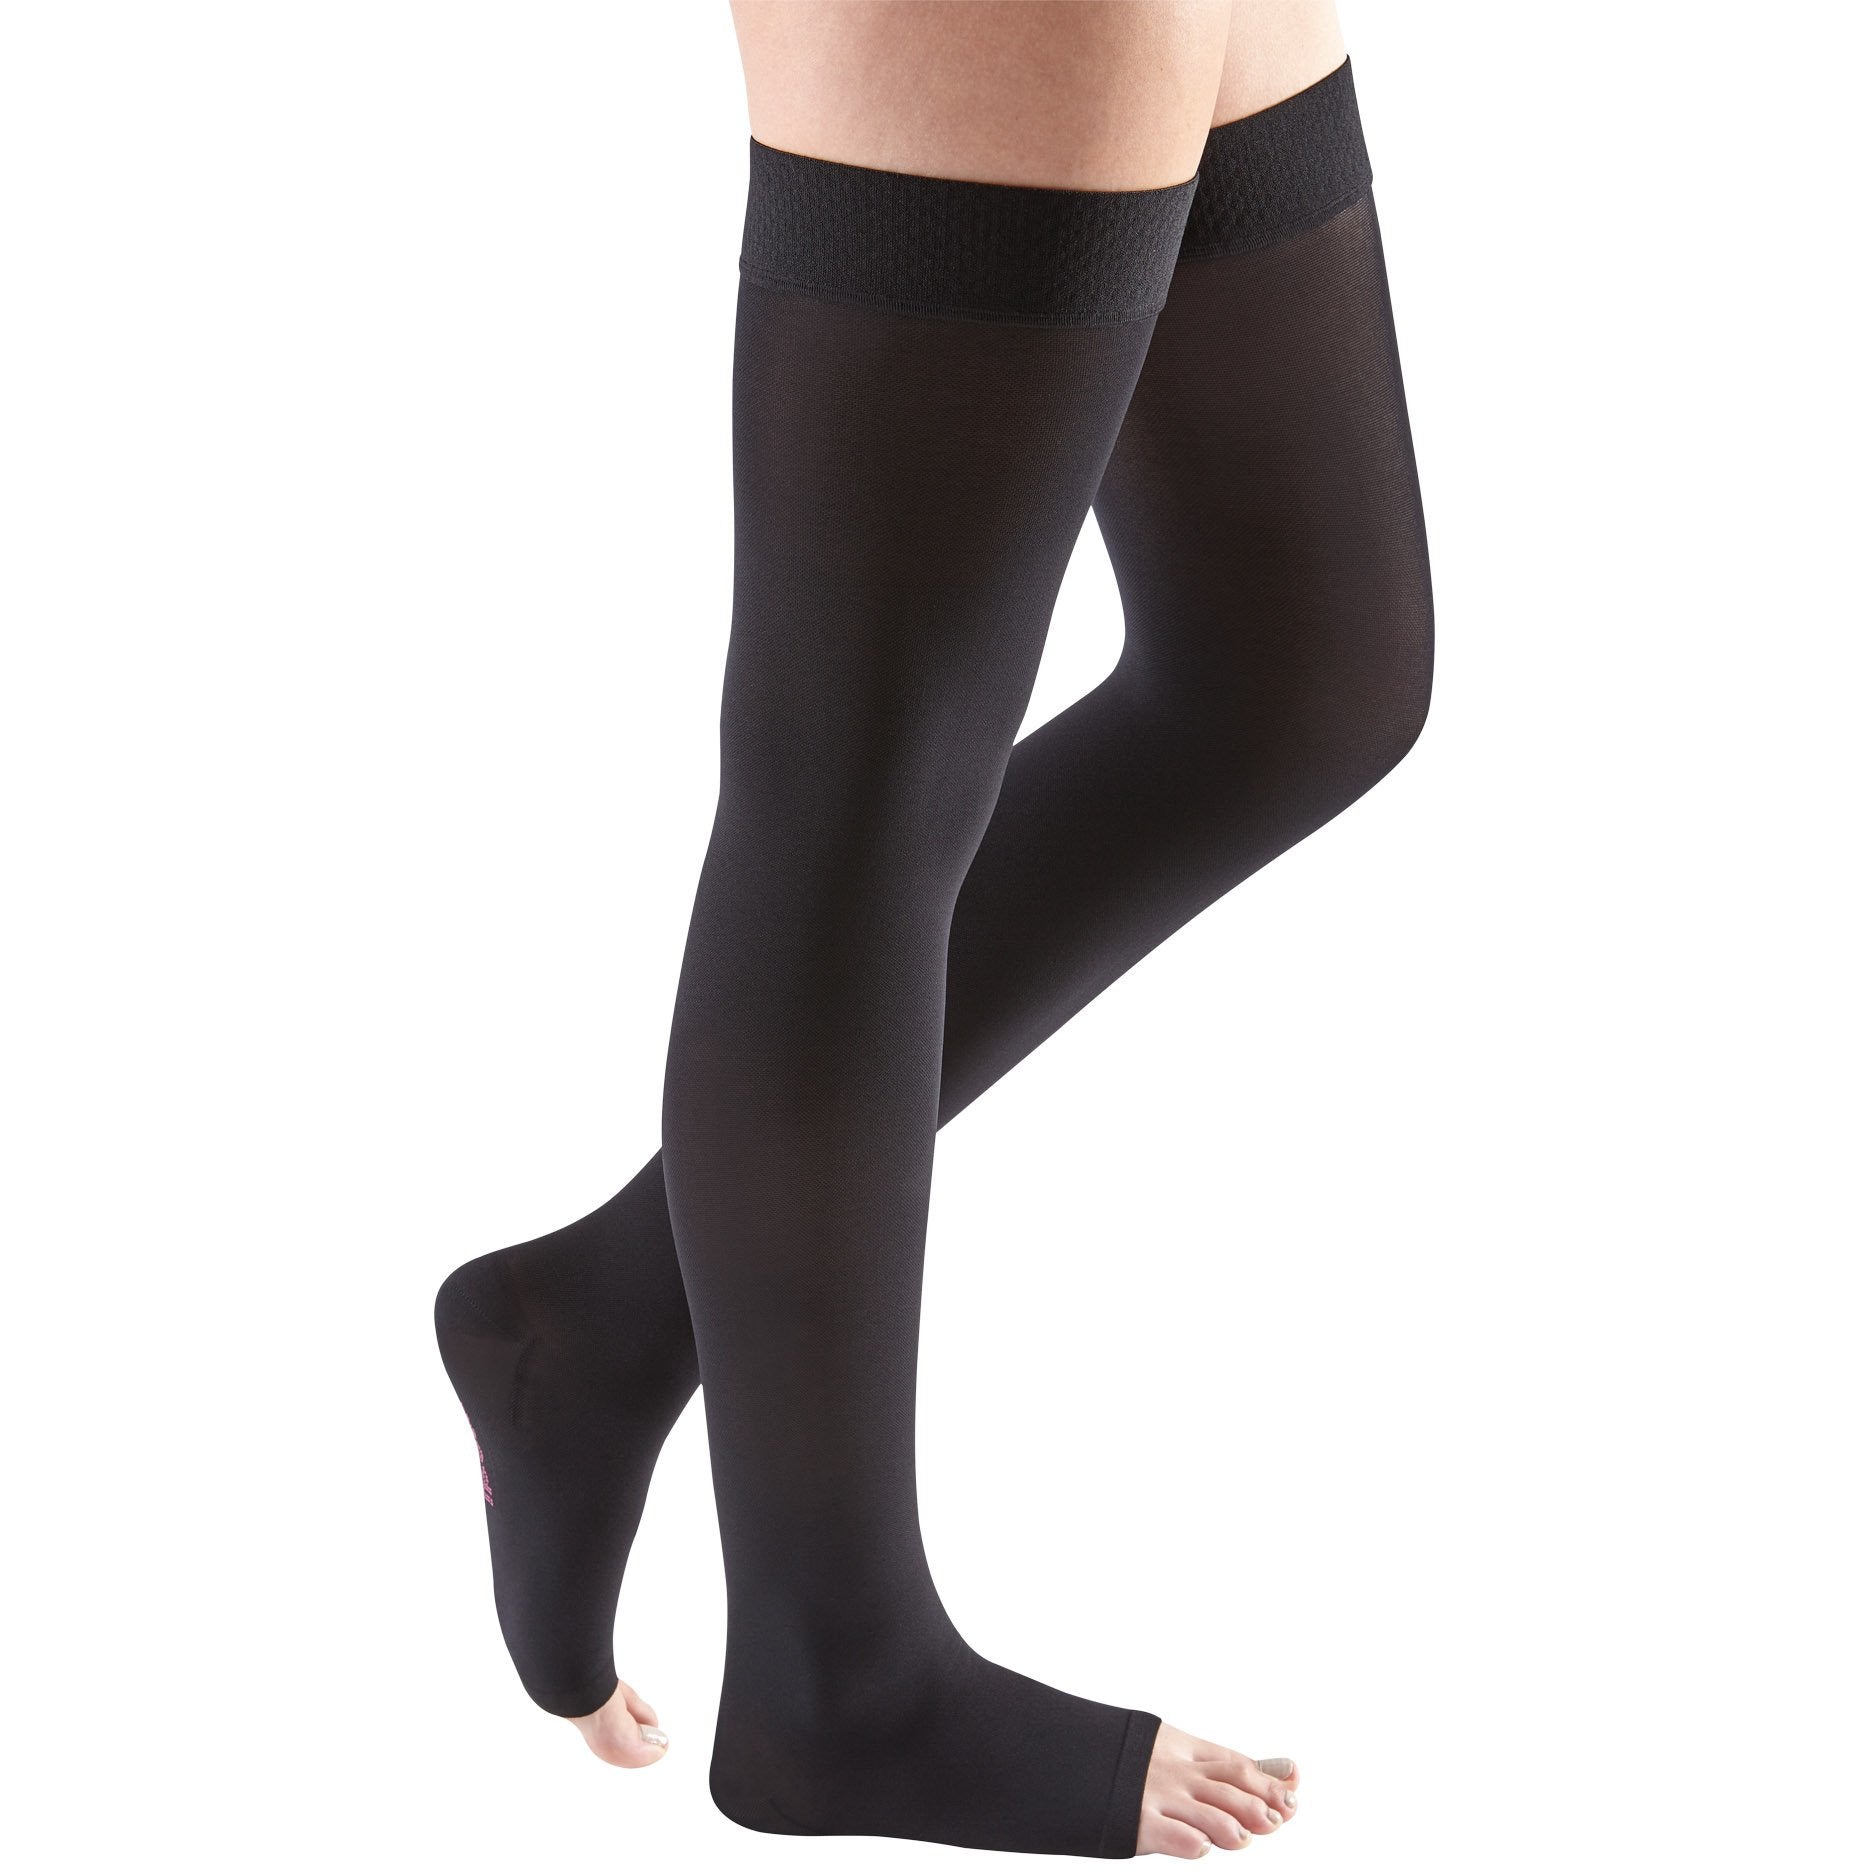 Mediven Comfort 15-20 mmHg OPEN TOE Thigh High w/ Beaded Silicone Top Band, Ebony]